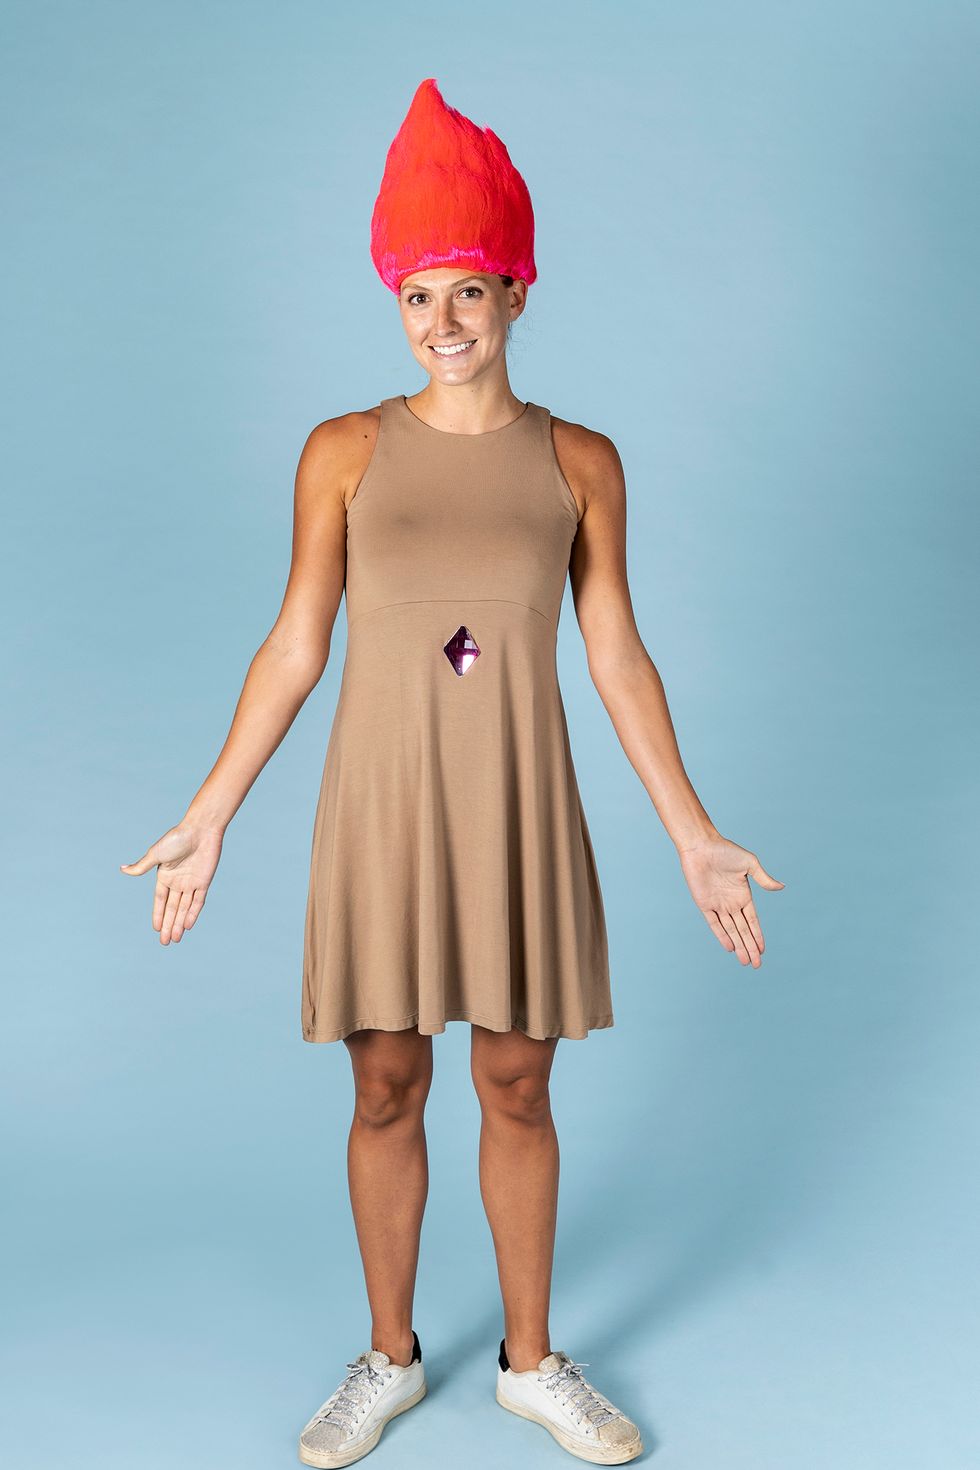 Easy Halloween costumes ideas! – LacunaFit